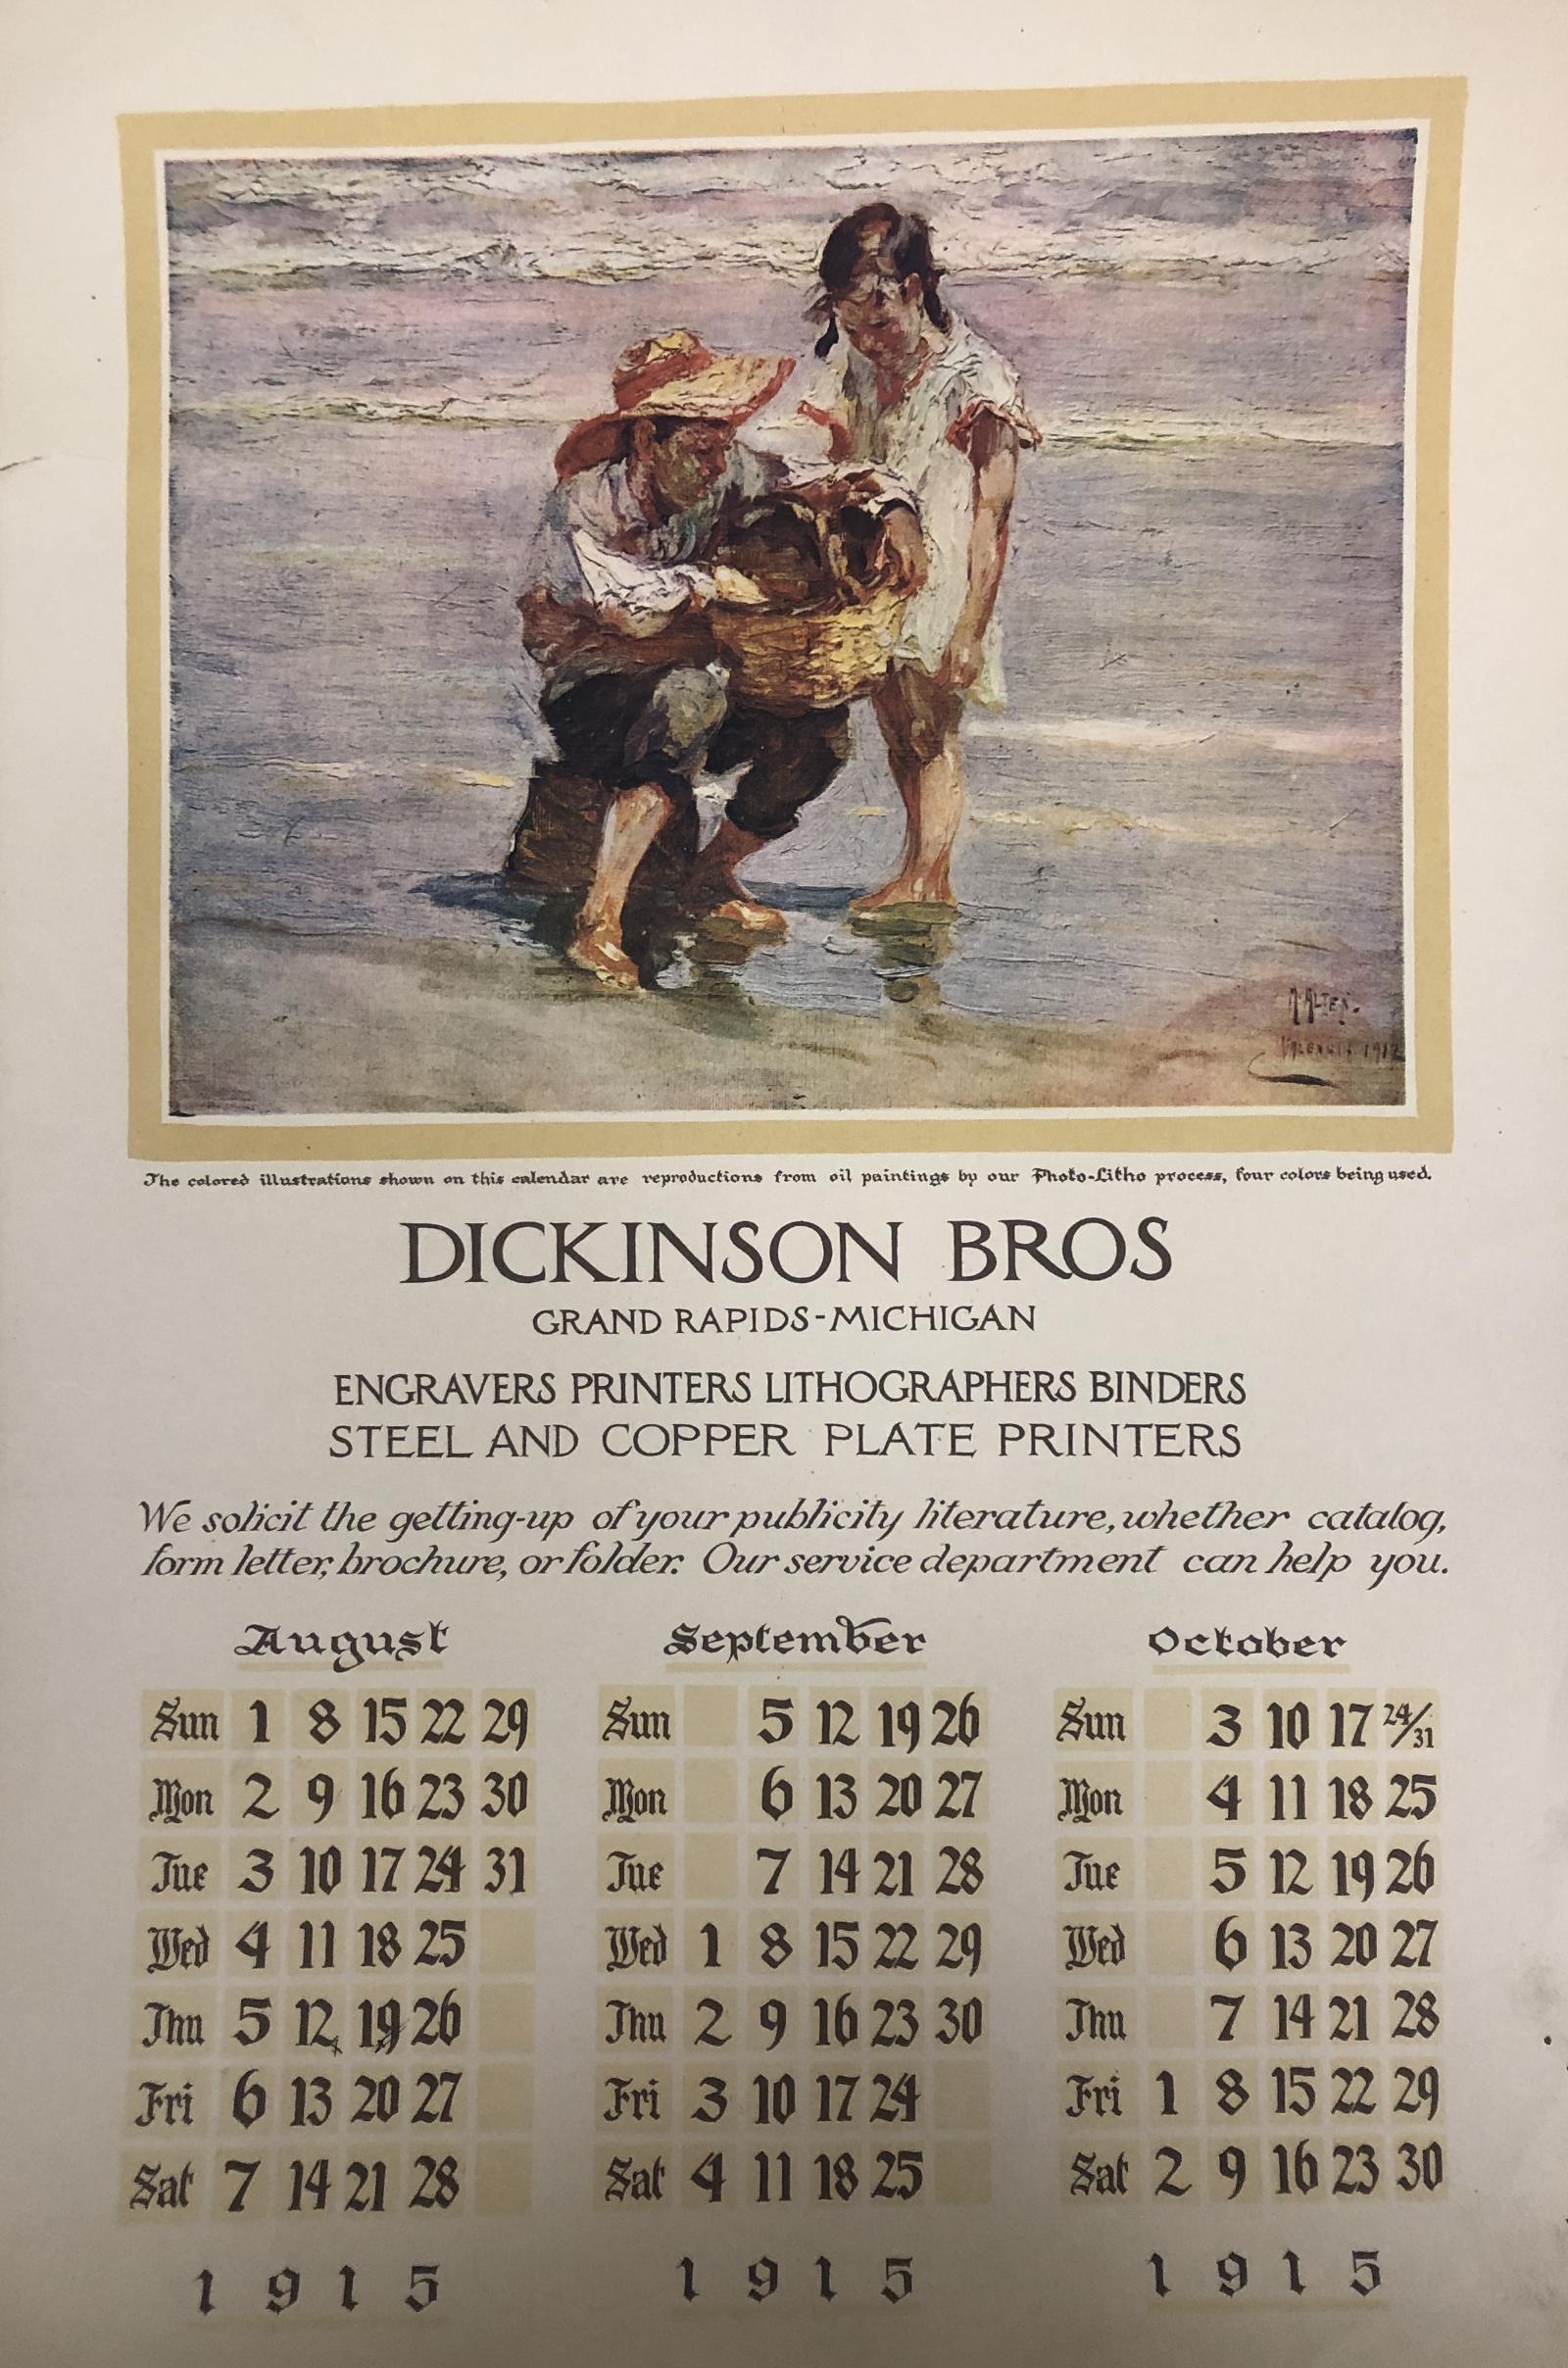 Four page calendar, each has a colored photo-lithograph of a painting (one is a reproduction of a Mathias Alten painting) and advertisements for Dickinson Brothers Engravers, Printers, Lithographers, Binders, Steel and Copper Plate Printers from Grand Rapids, Michigan.